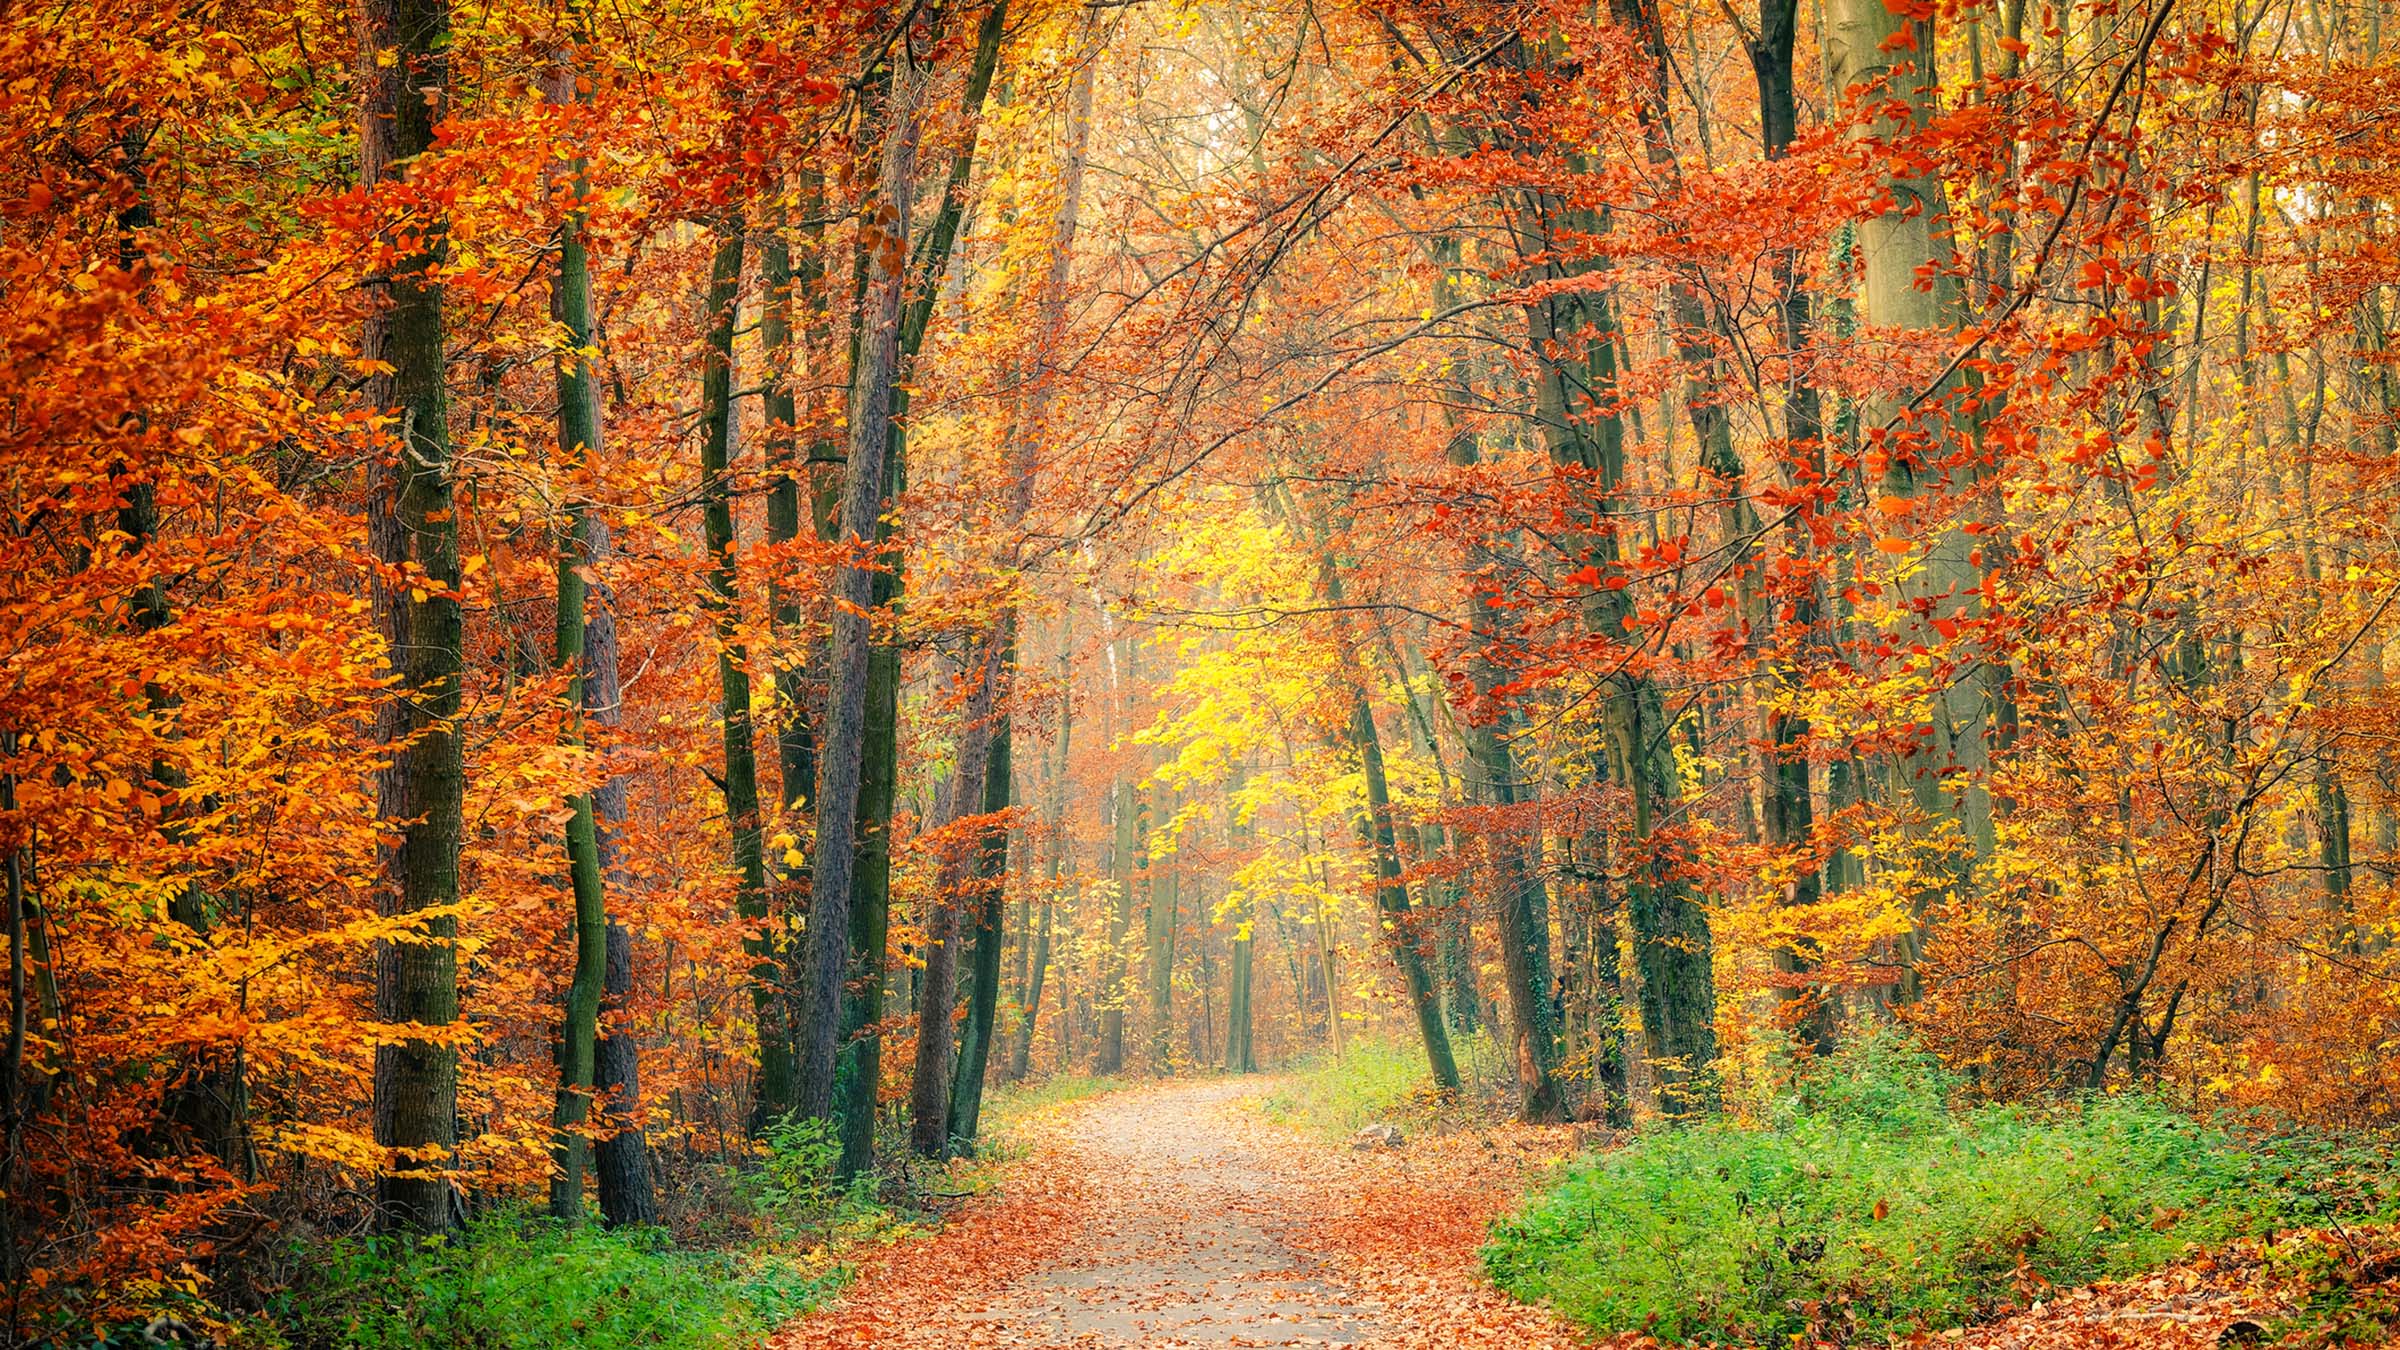 A forest trail surrounded by bright, colorful fall foliage as the tree leaves change colors during the autumn season.